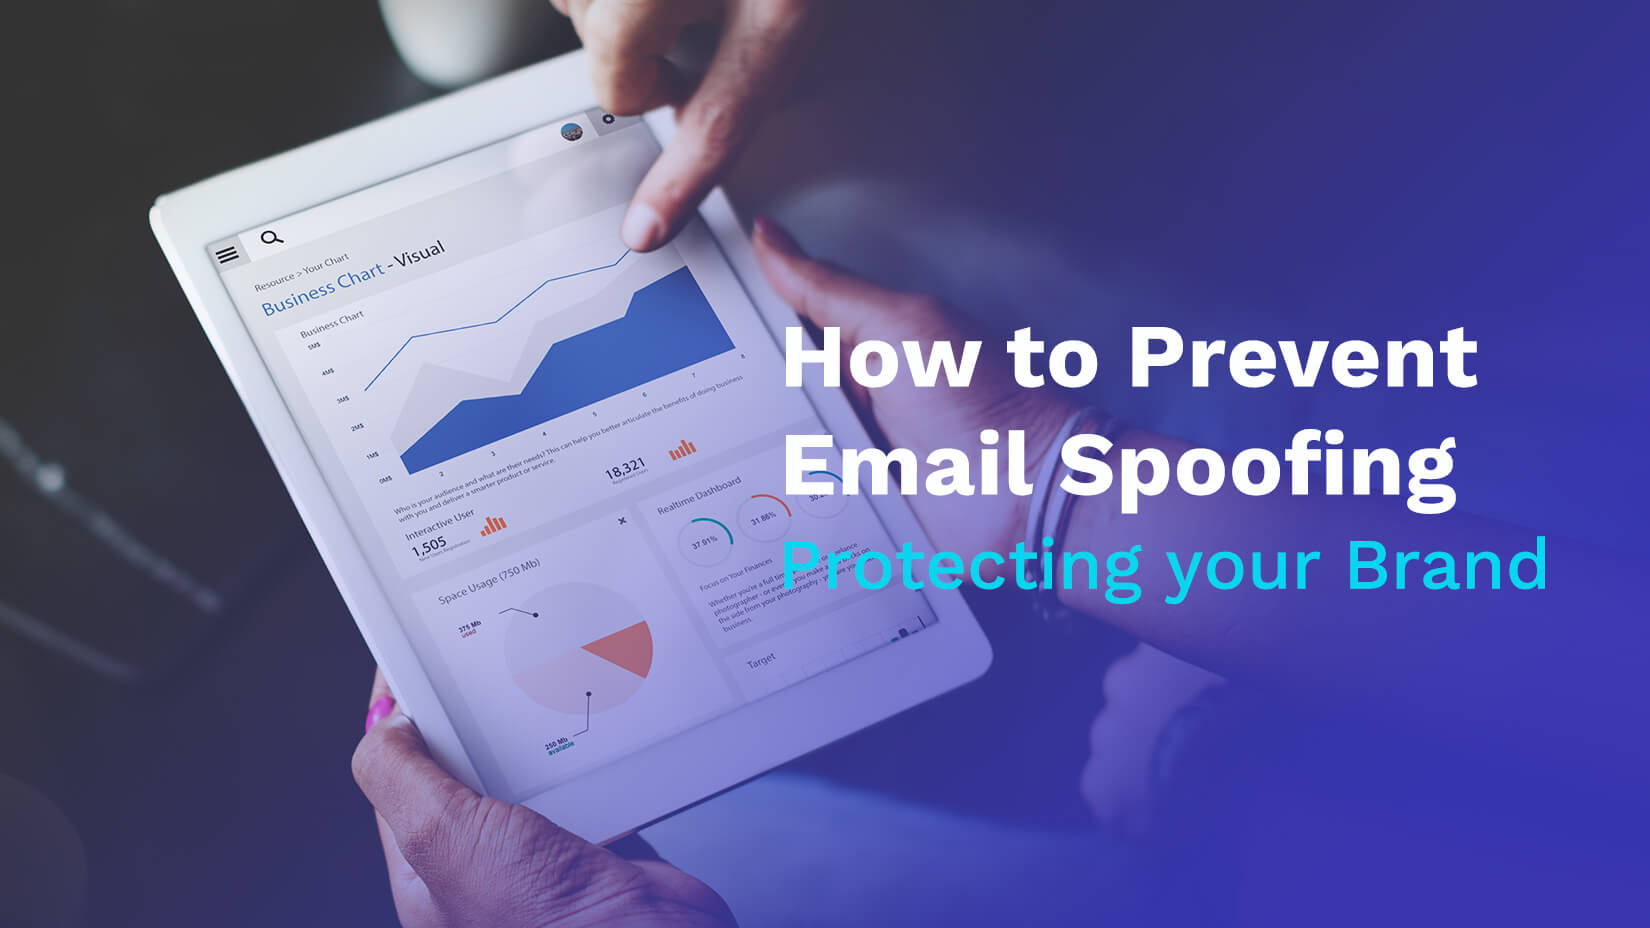 DMARC: How to Prevent Email Spoofing